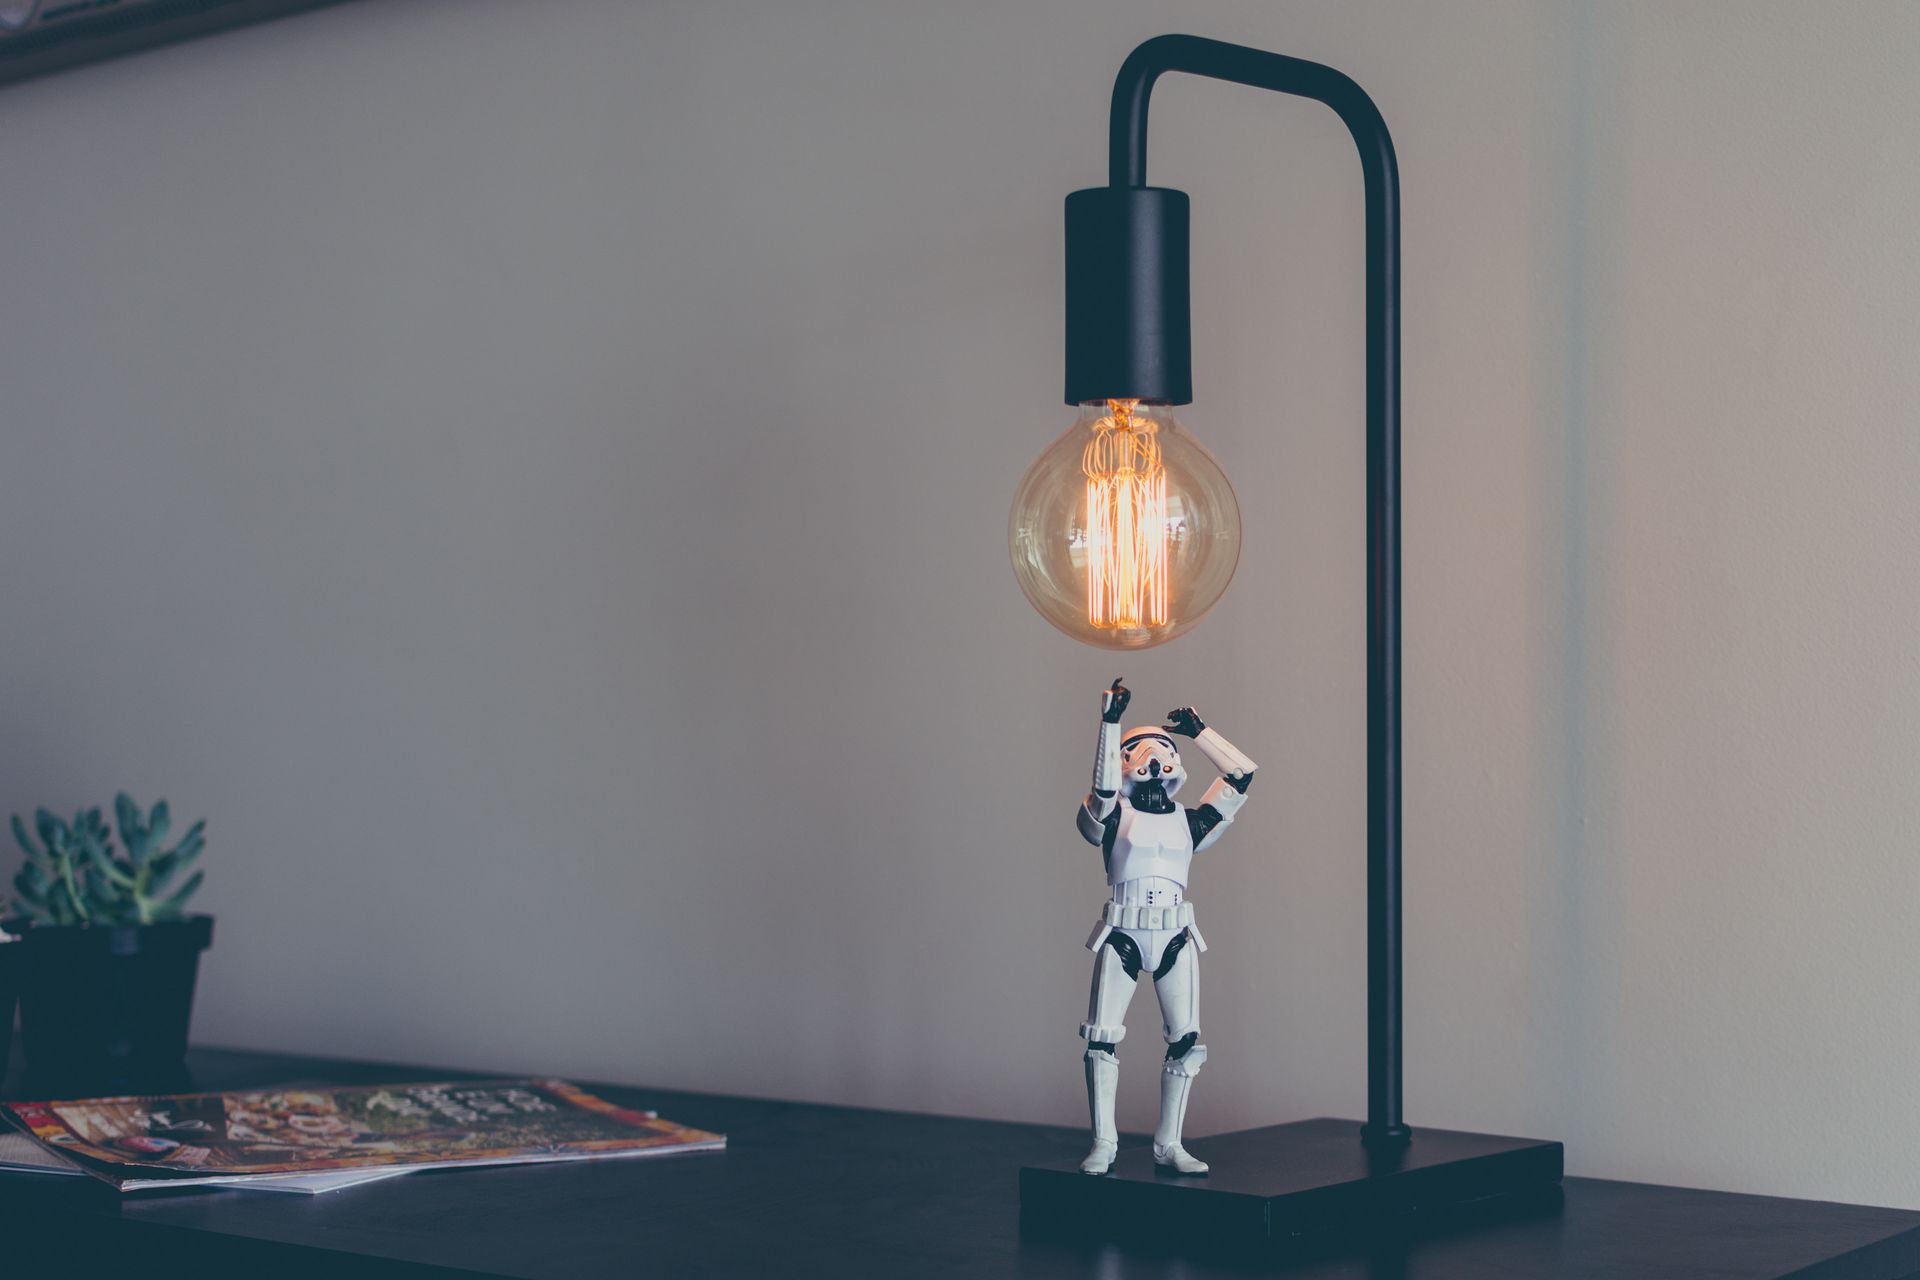 A storm trooper figurine is standing next to a lamp on a table.